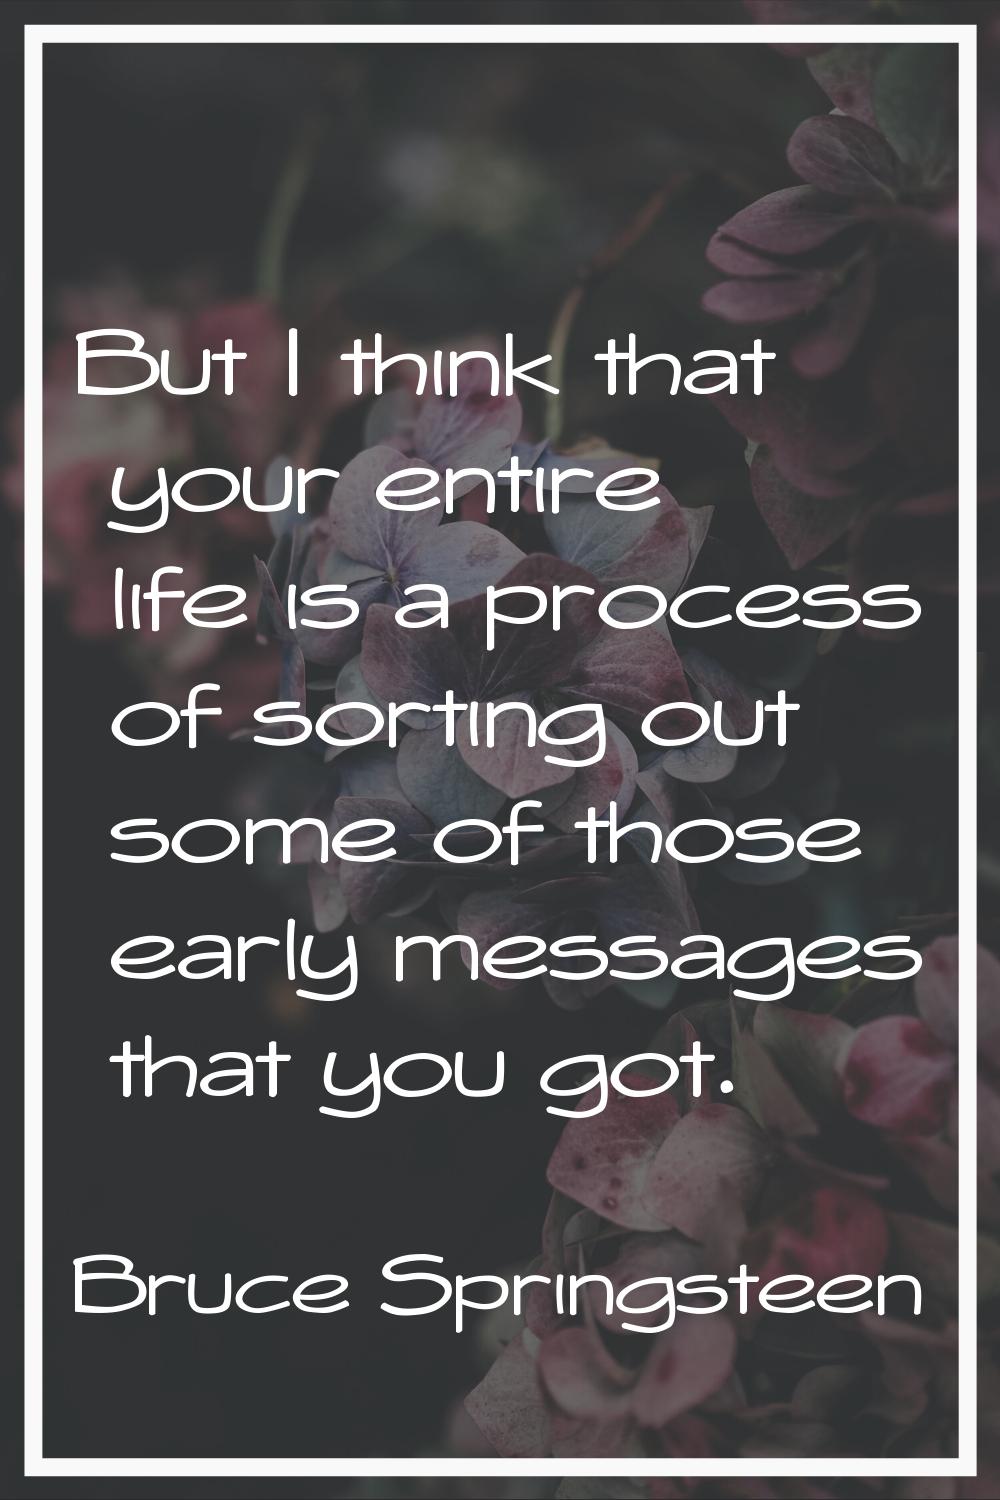 But I think that your entire life is a process of sorting out some of those early messages that you